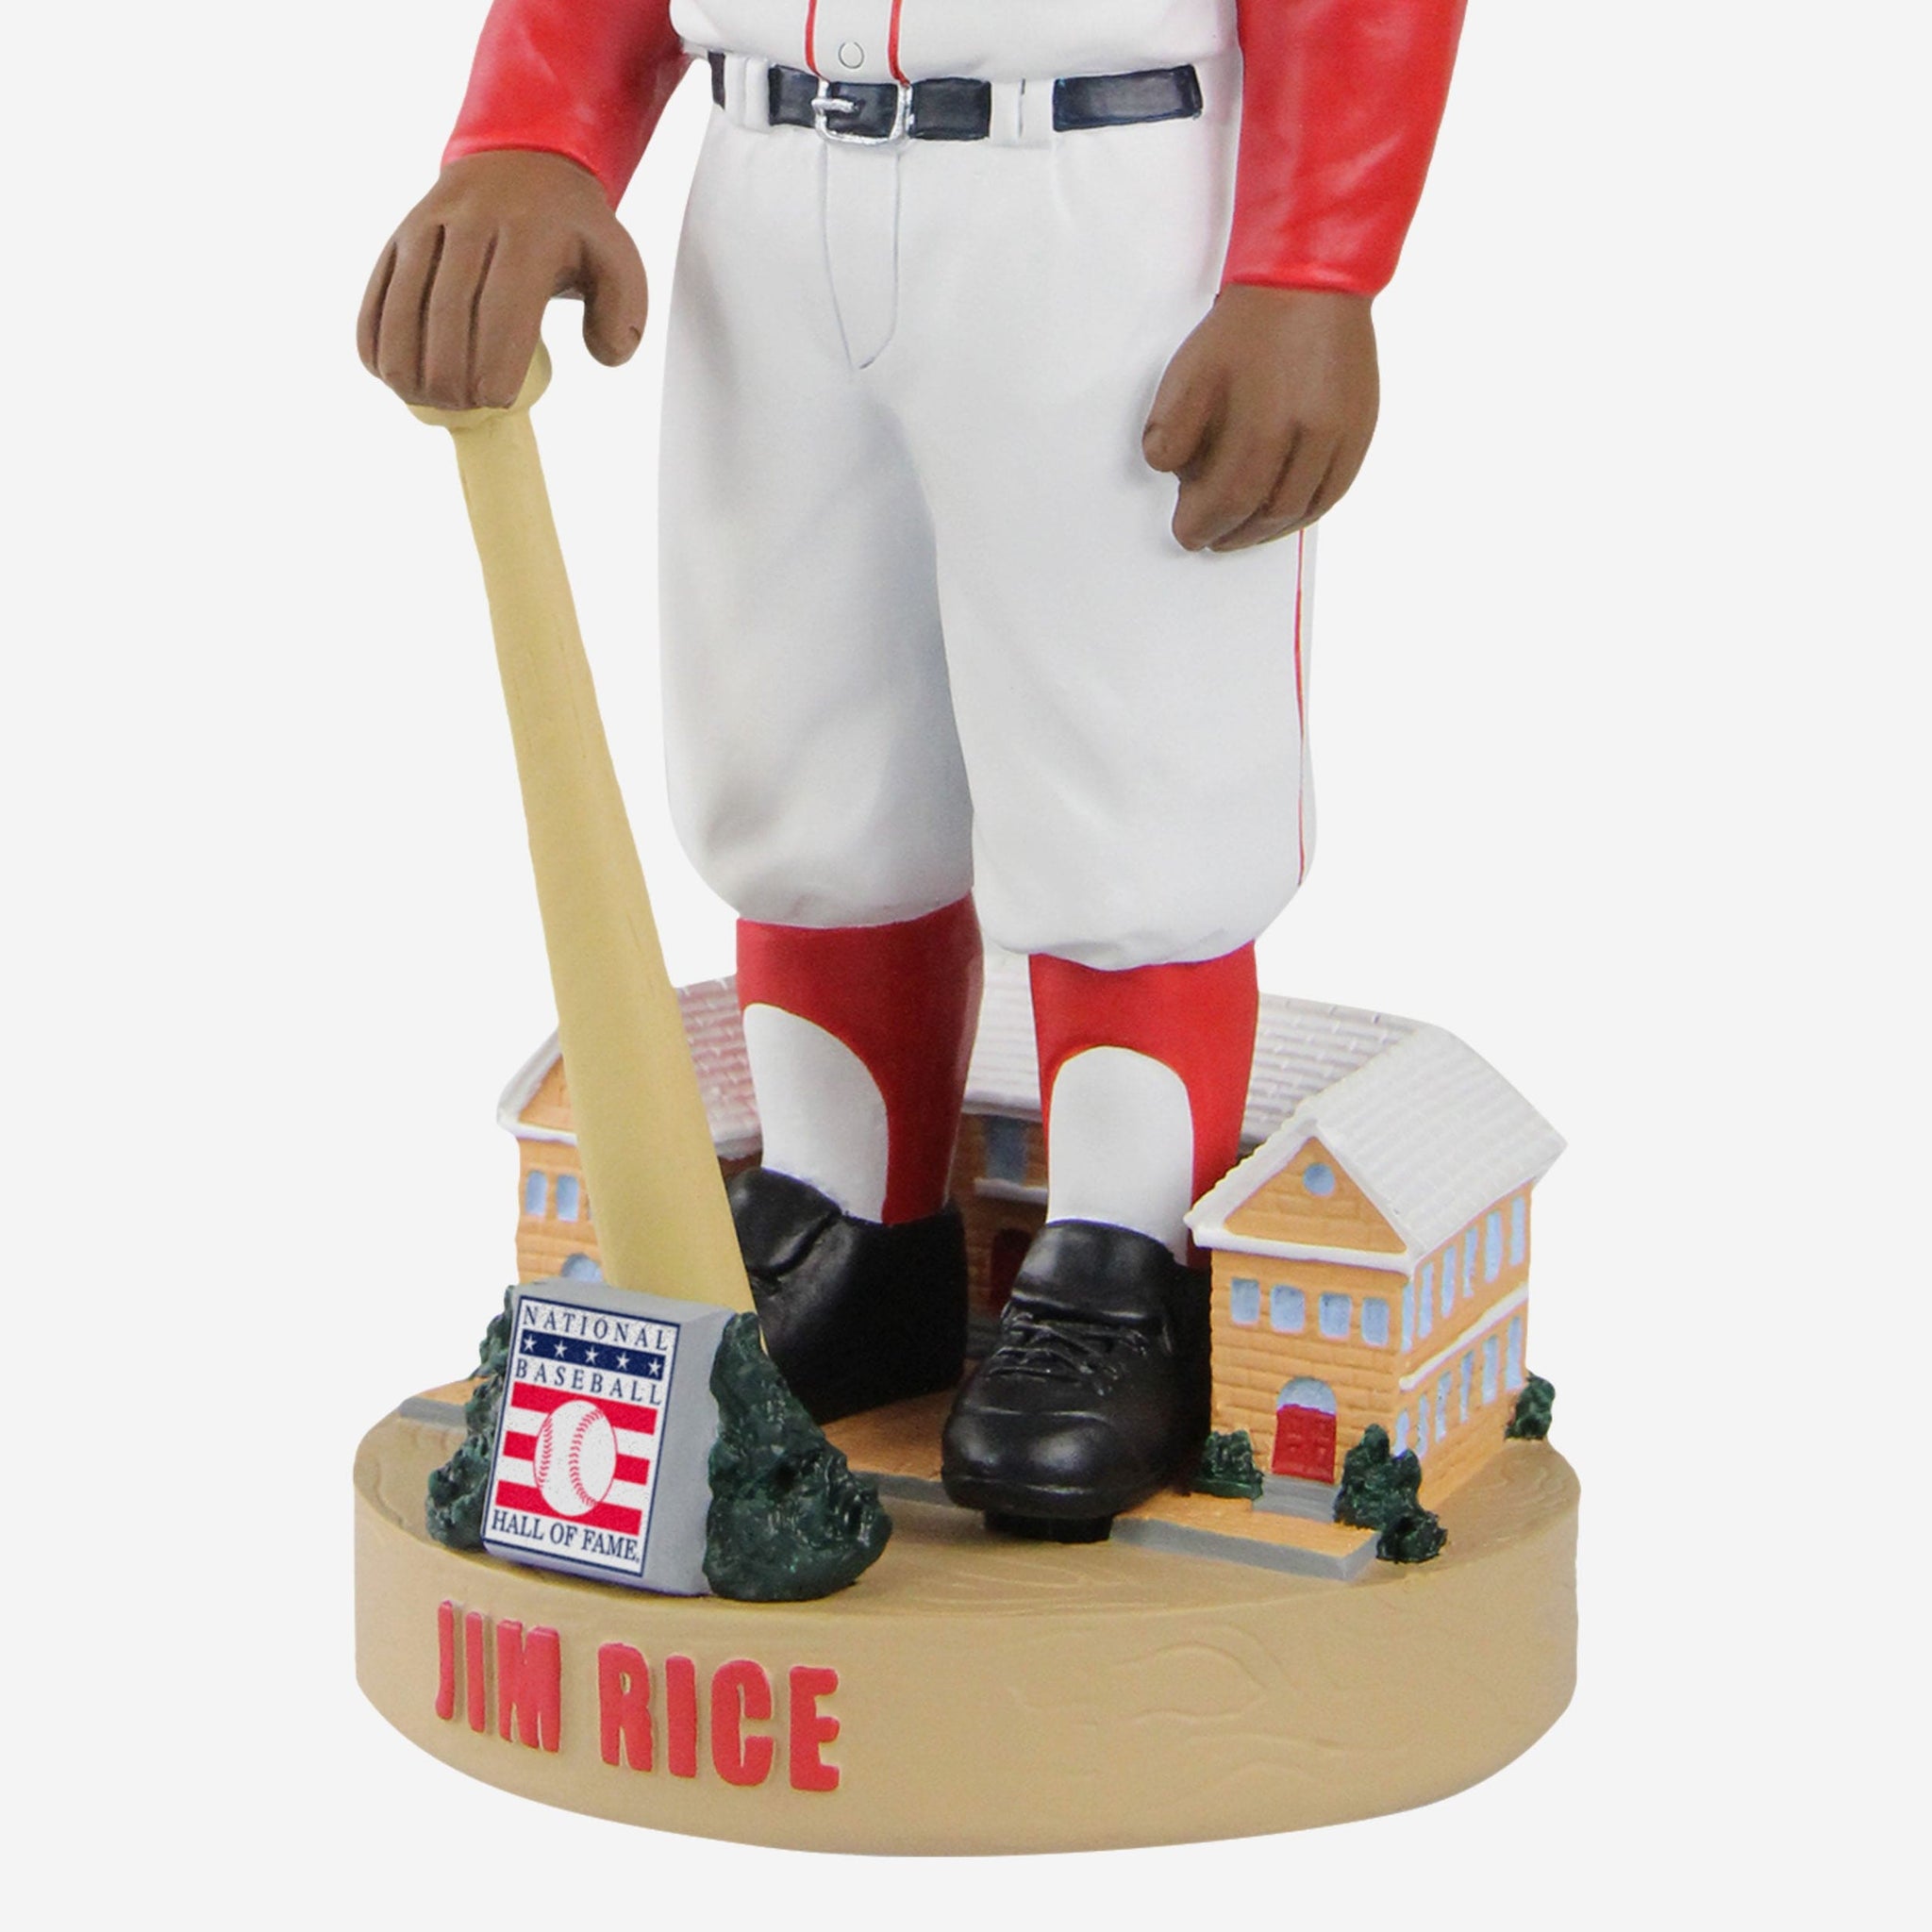 Jim Rice Boston Red Sox Hall of Fame Sublimated Display Case with Image